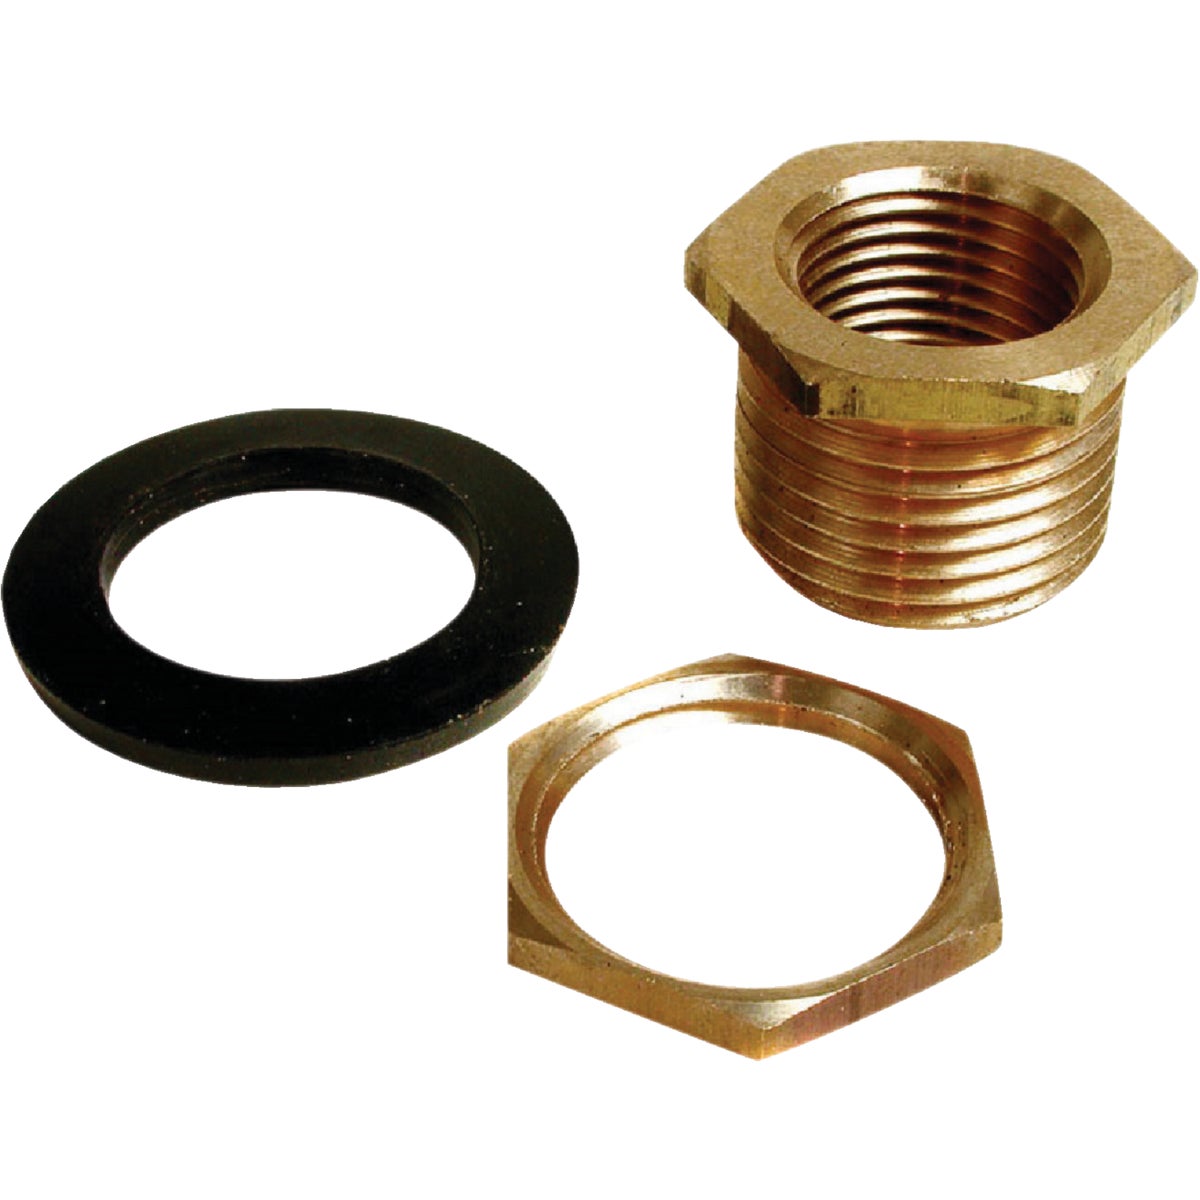 Item 431109, 1/2 In. FPT for threaded overflow pipes and male garden threads.